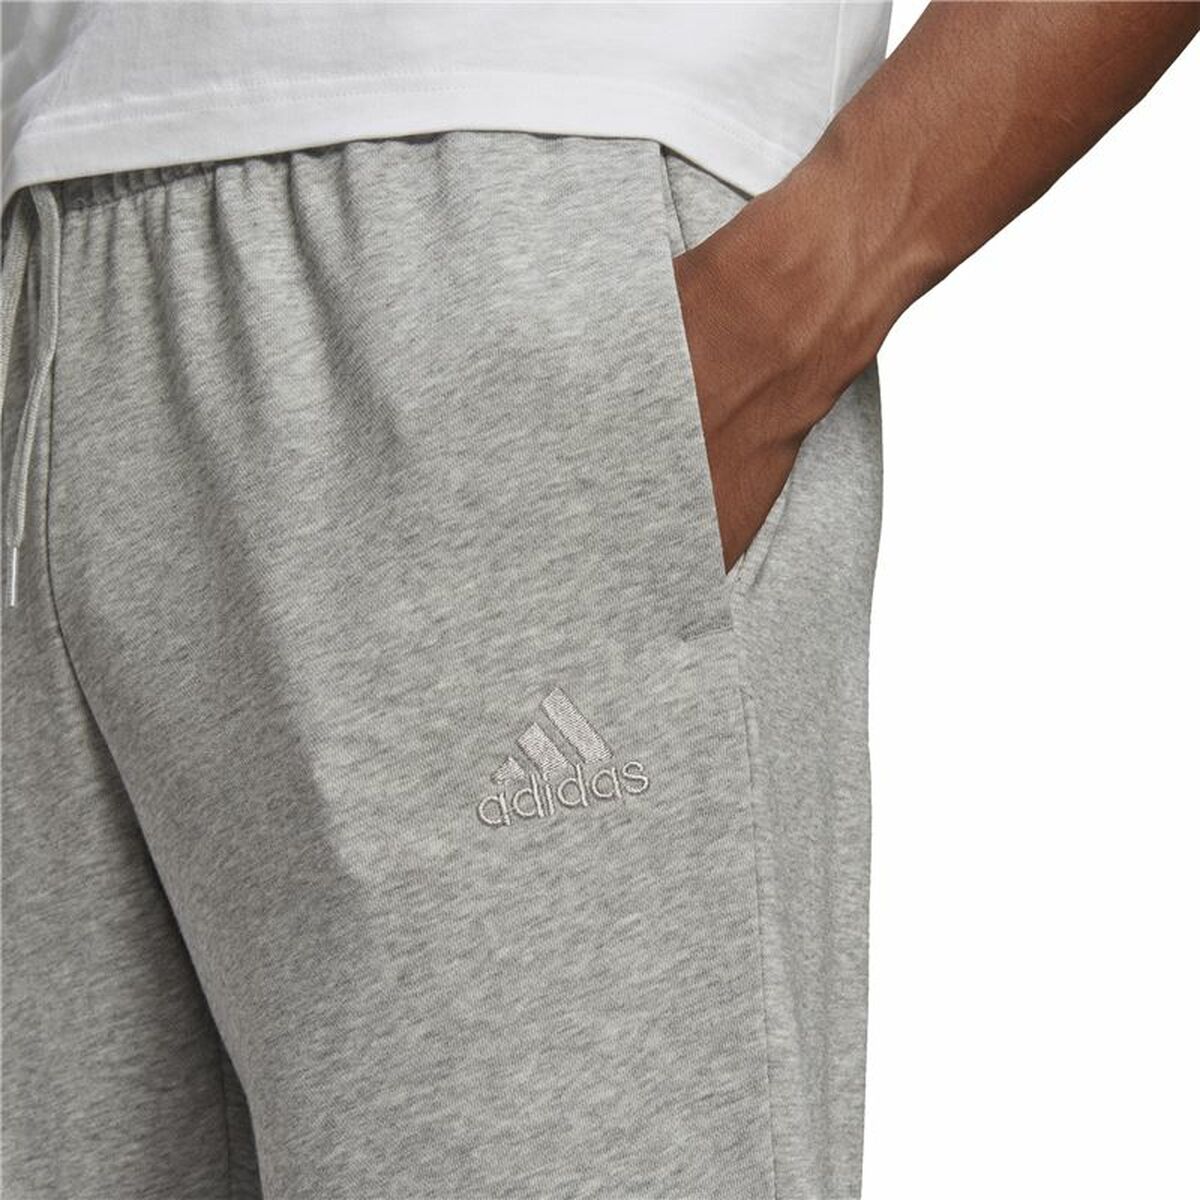 Adult Trousers Adidas Essentials French Terry Grey